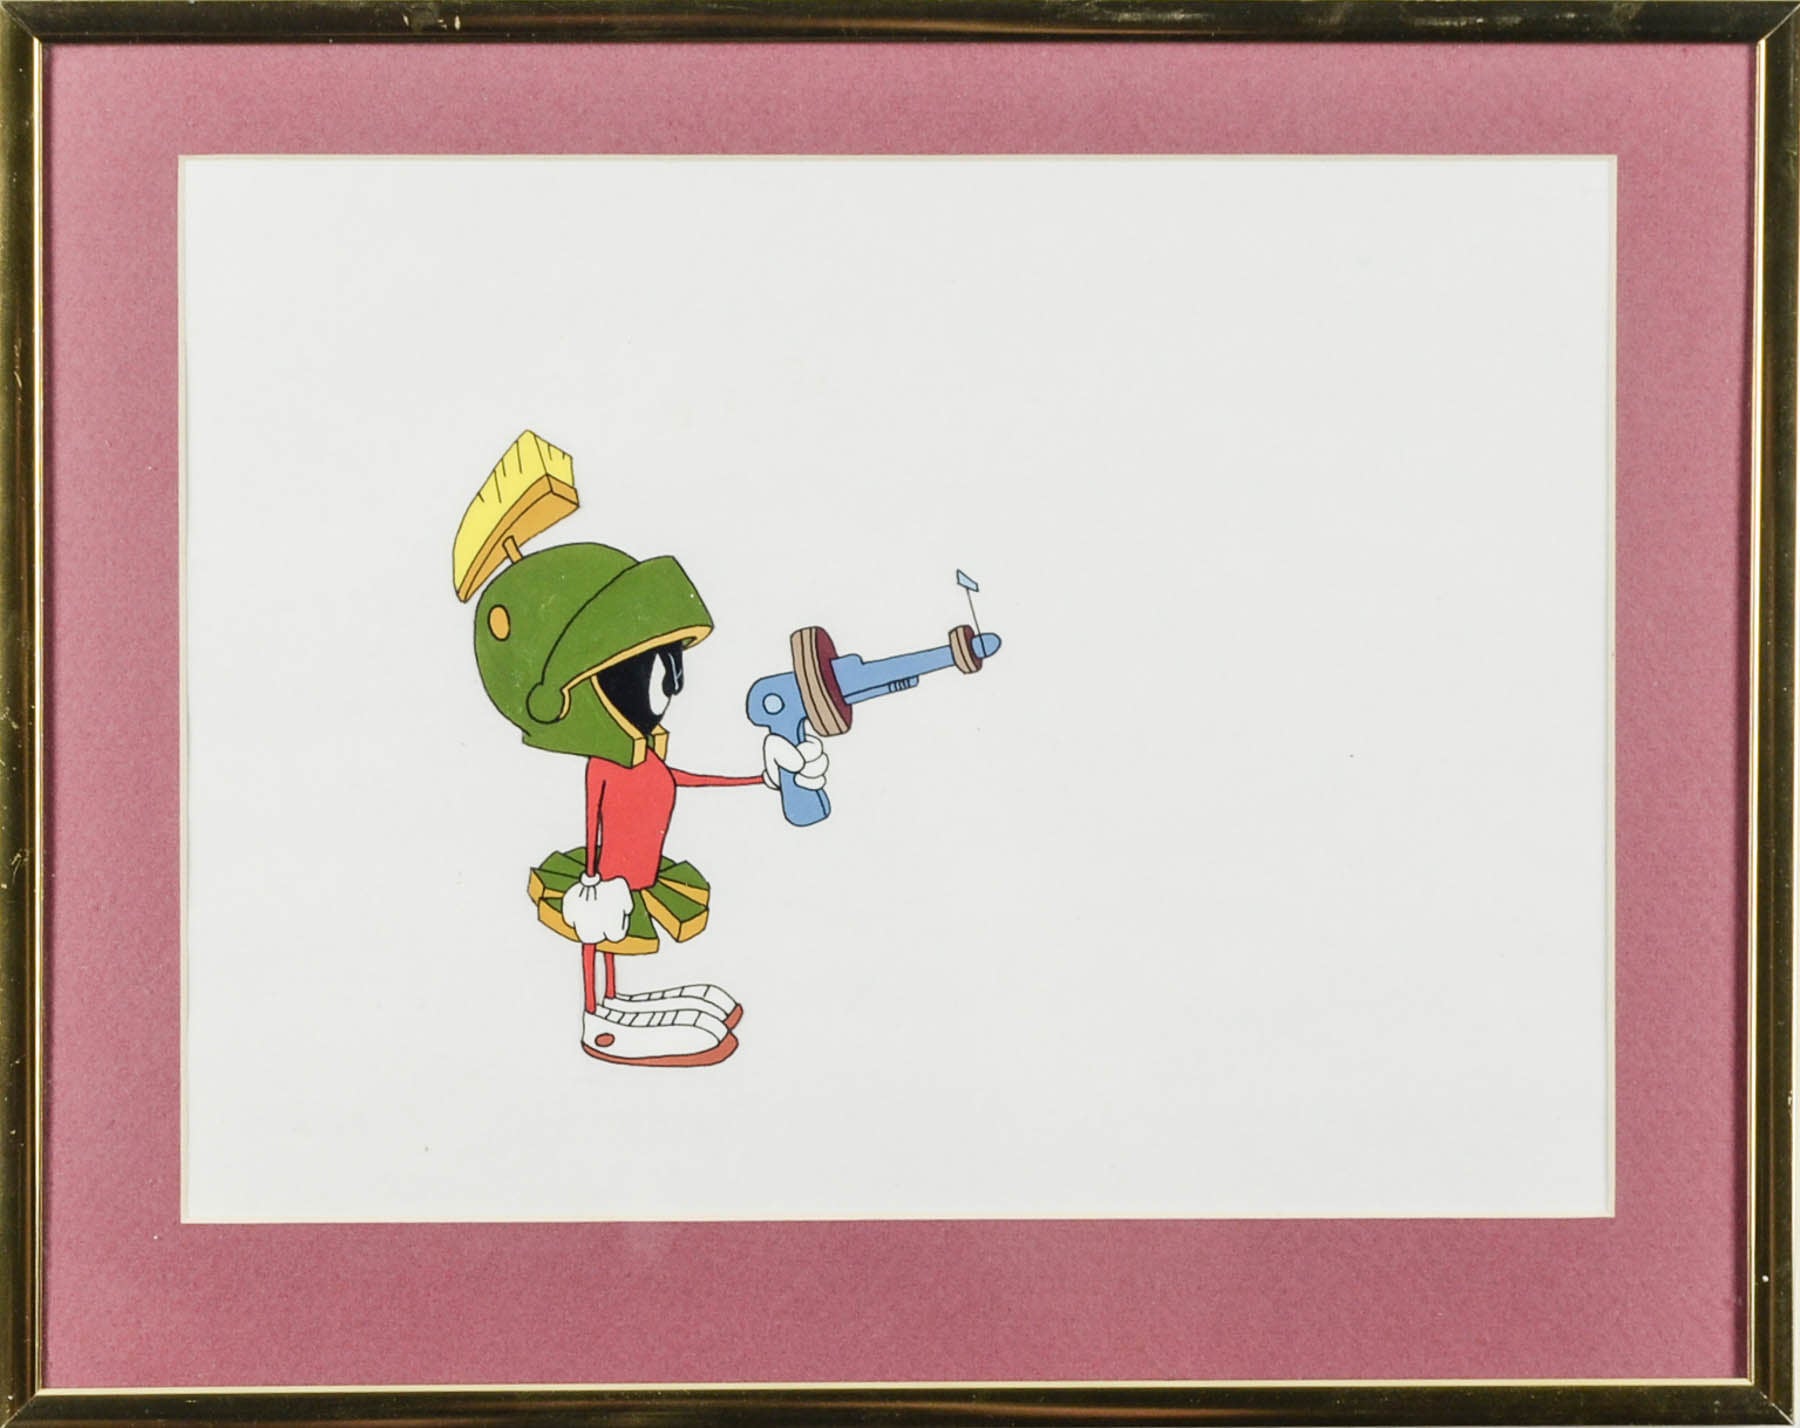 Marvin the Martian & K9 Hand Painted Cels (2 Pieces)